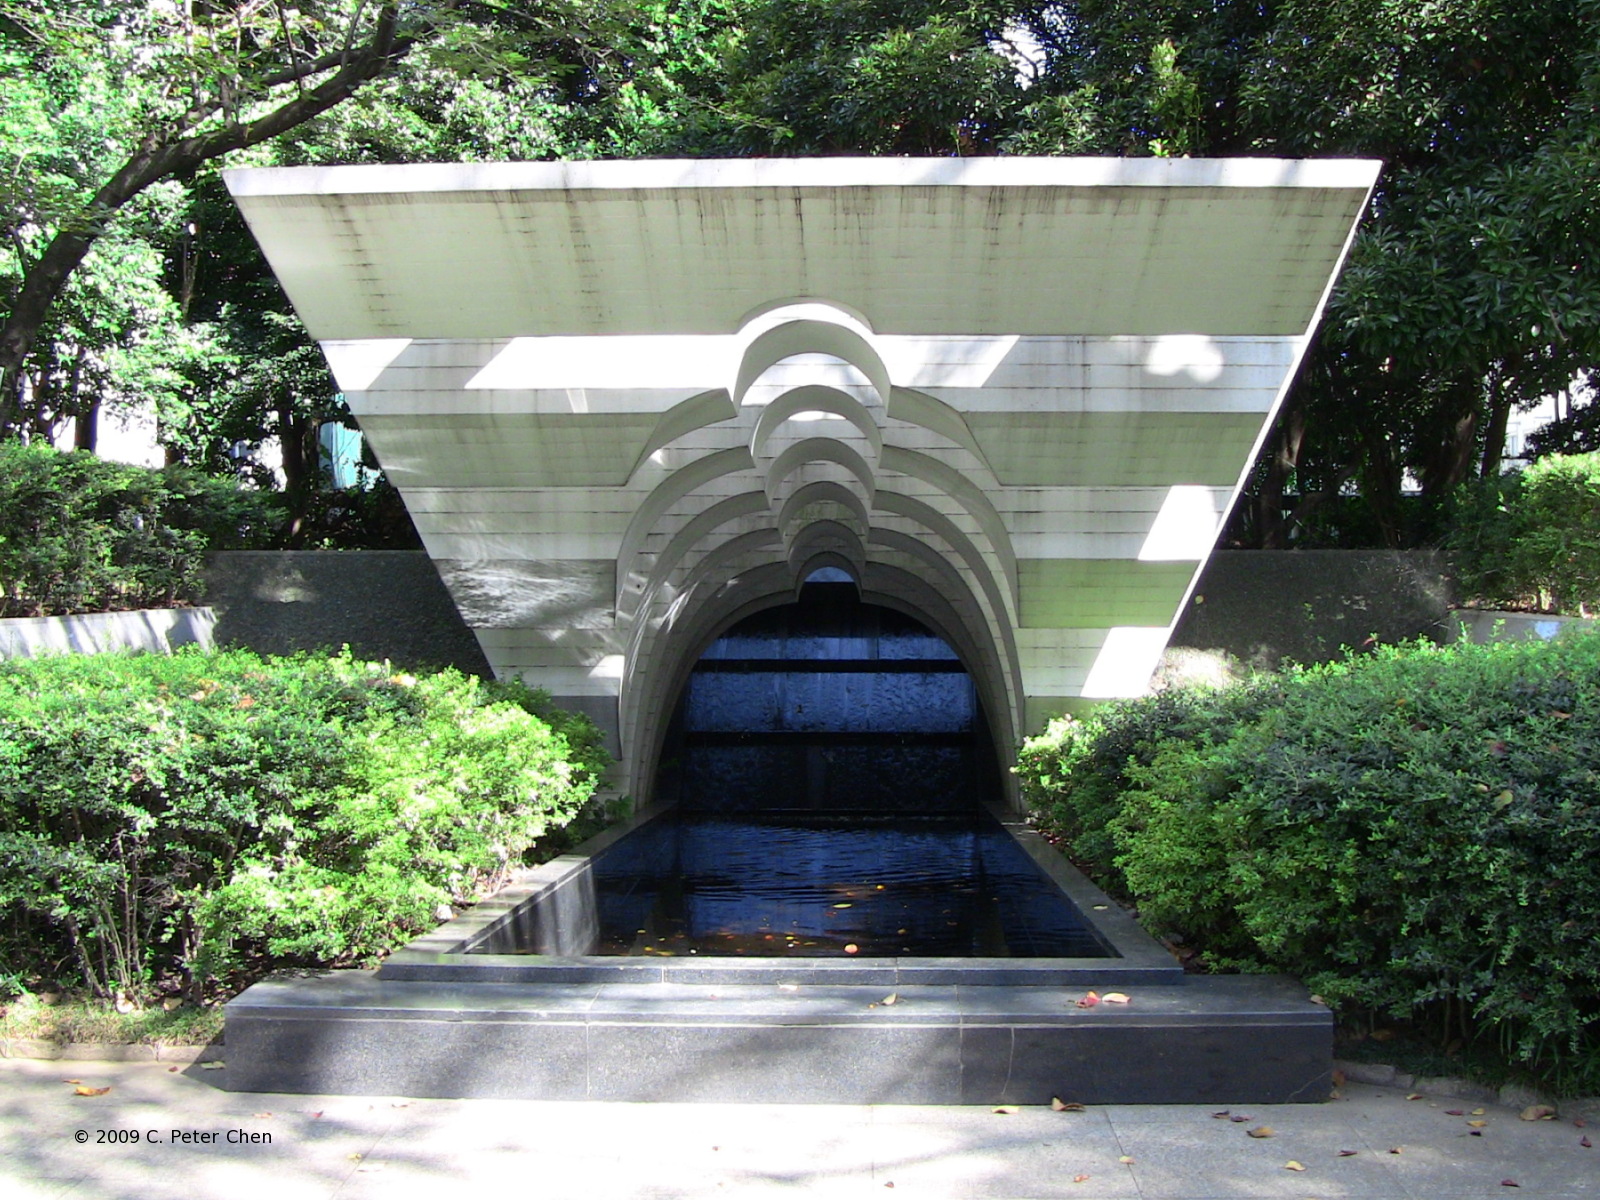 'Irei no Izumi' monument on the grounds of Yasukuni Shrine dedicated to who died of thirst in battle, Tokyo, Japan, 7 Sep 2009